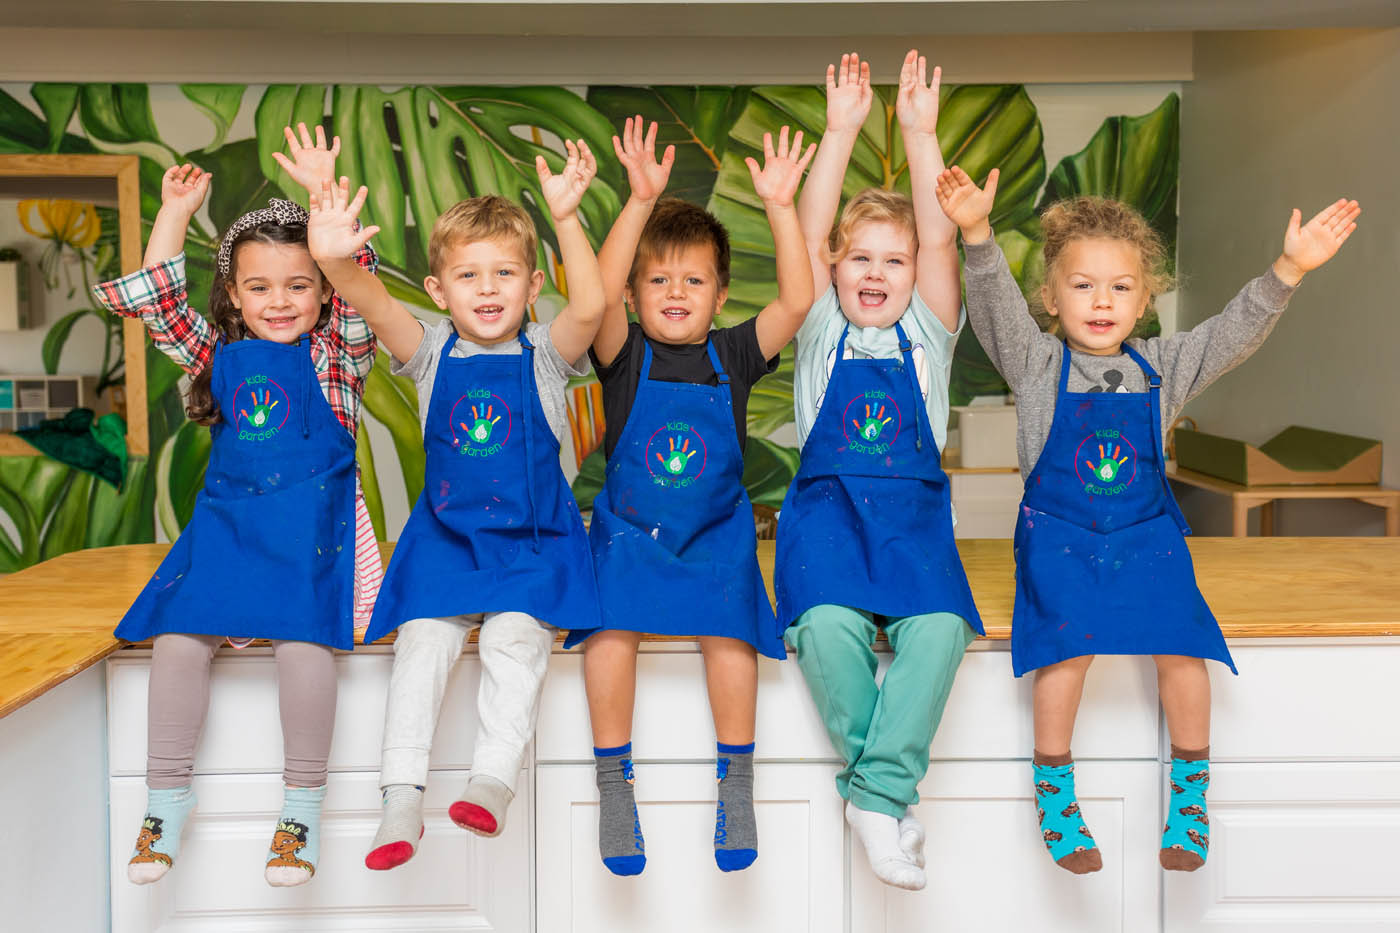 Kids in blue aprons at Kids Garden learning center.